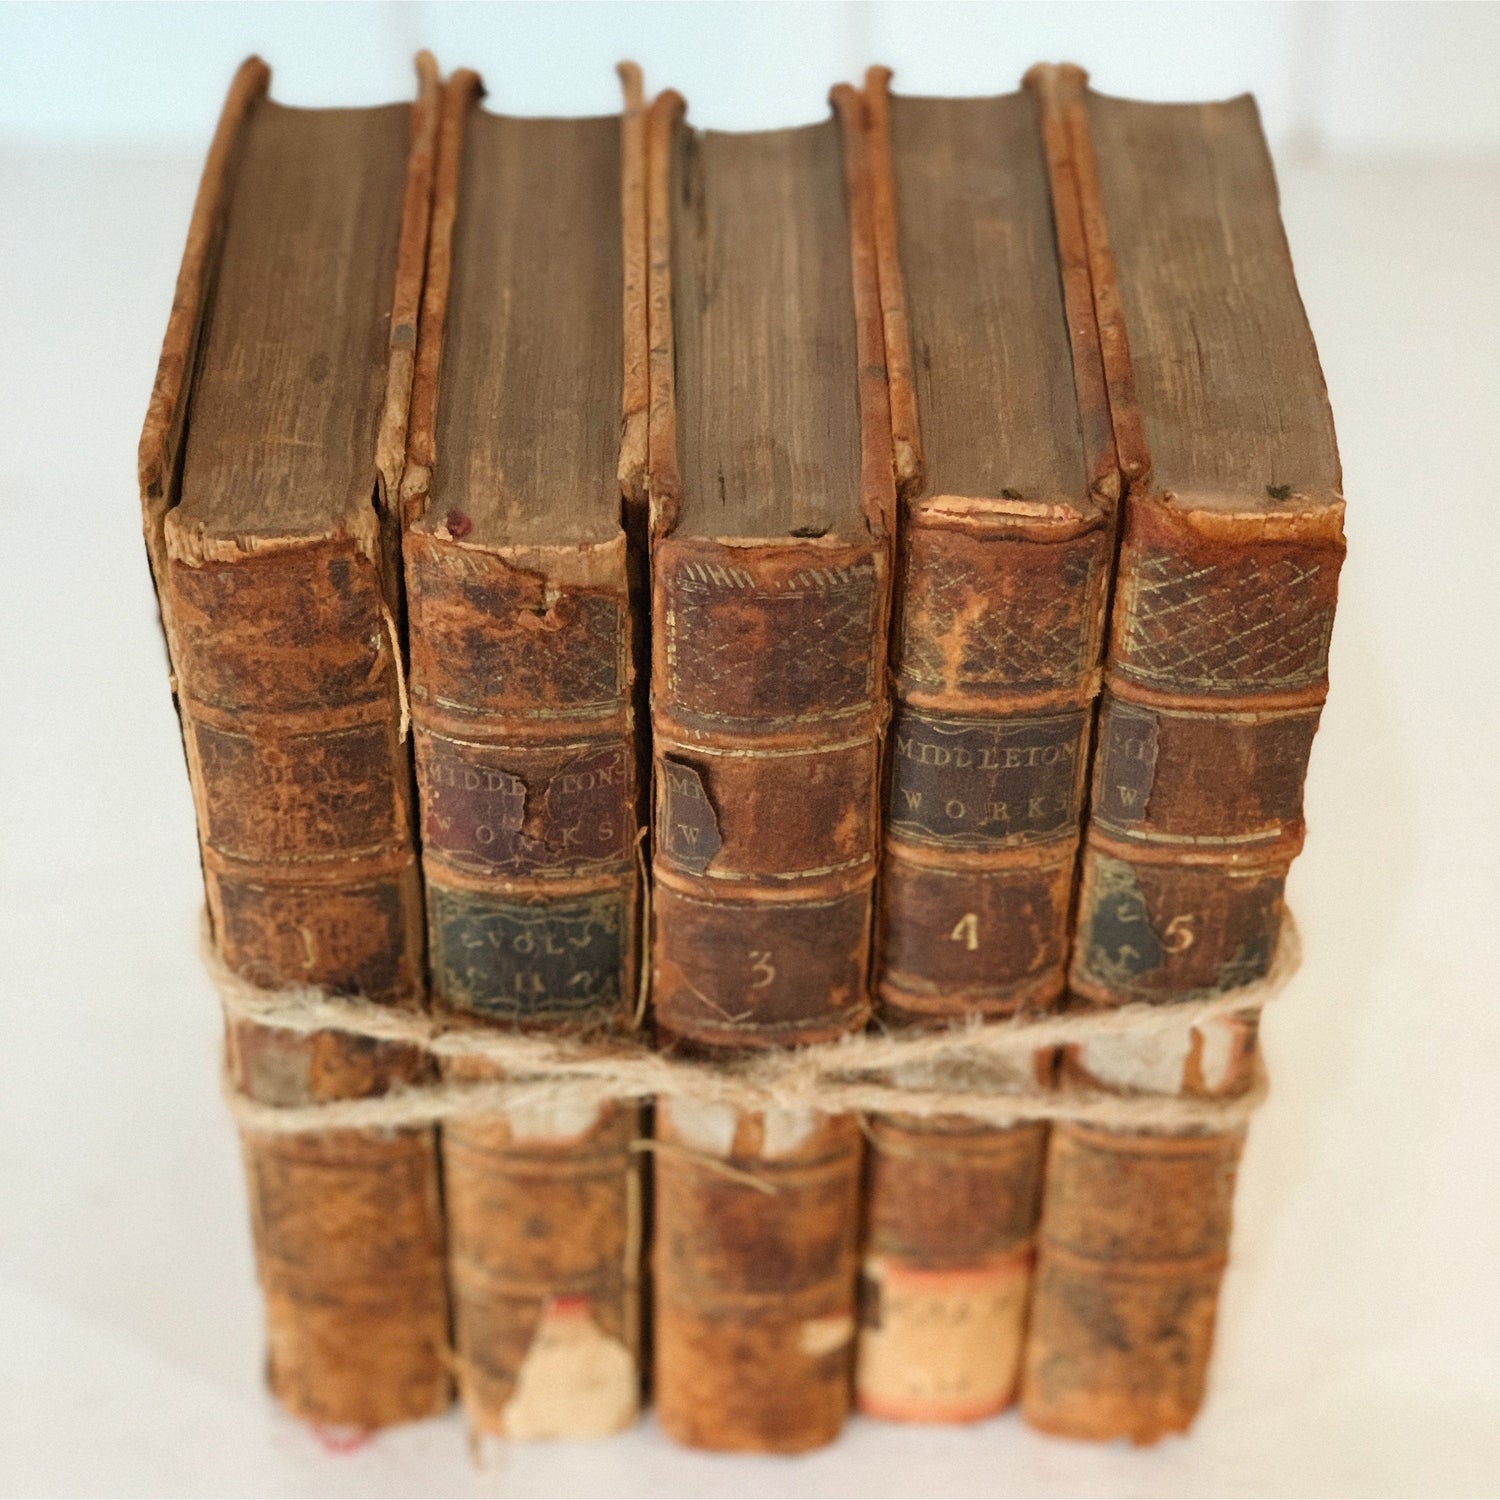 1700s Antiquarian The Miscellaneous Works of Conyers Middleton, 1755, 5 Volume Set